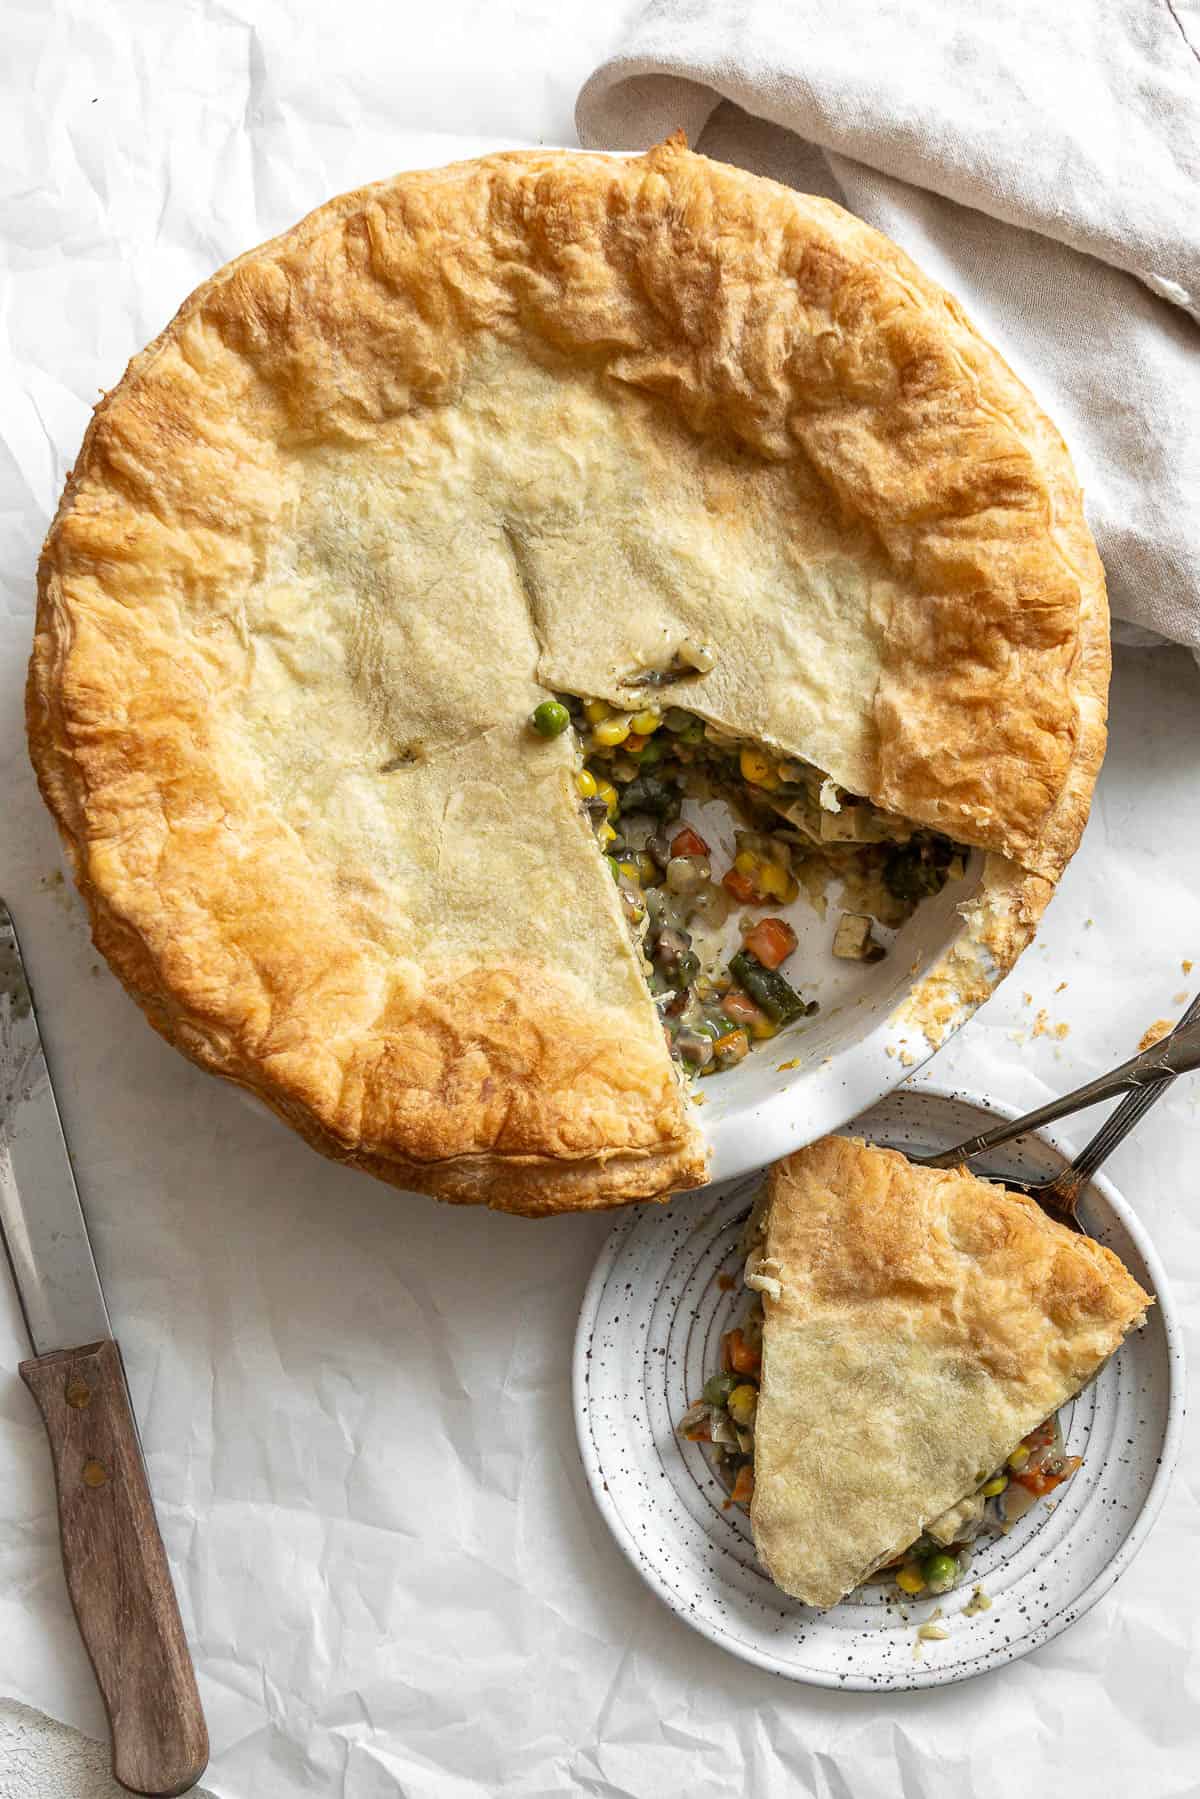 completed Mixed Vegetable Vegan Pot Pie a،nst white surface